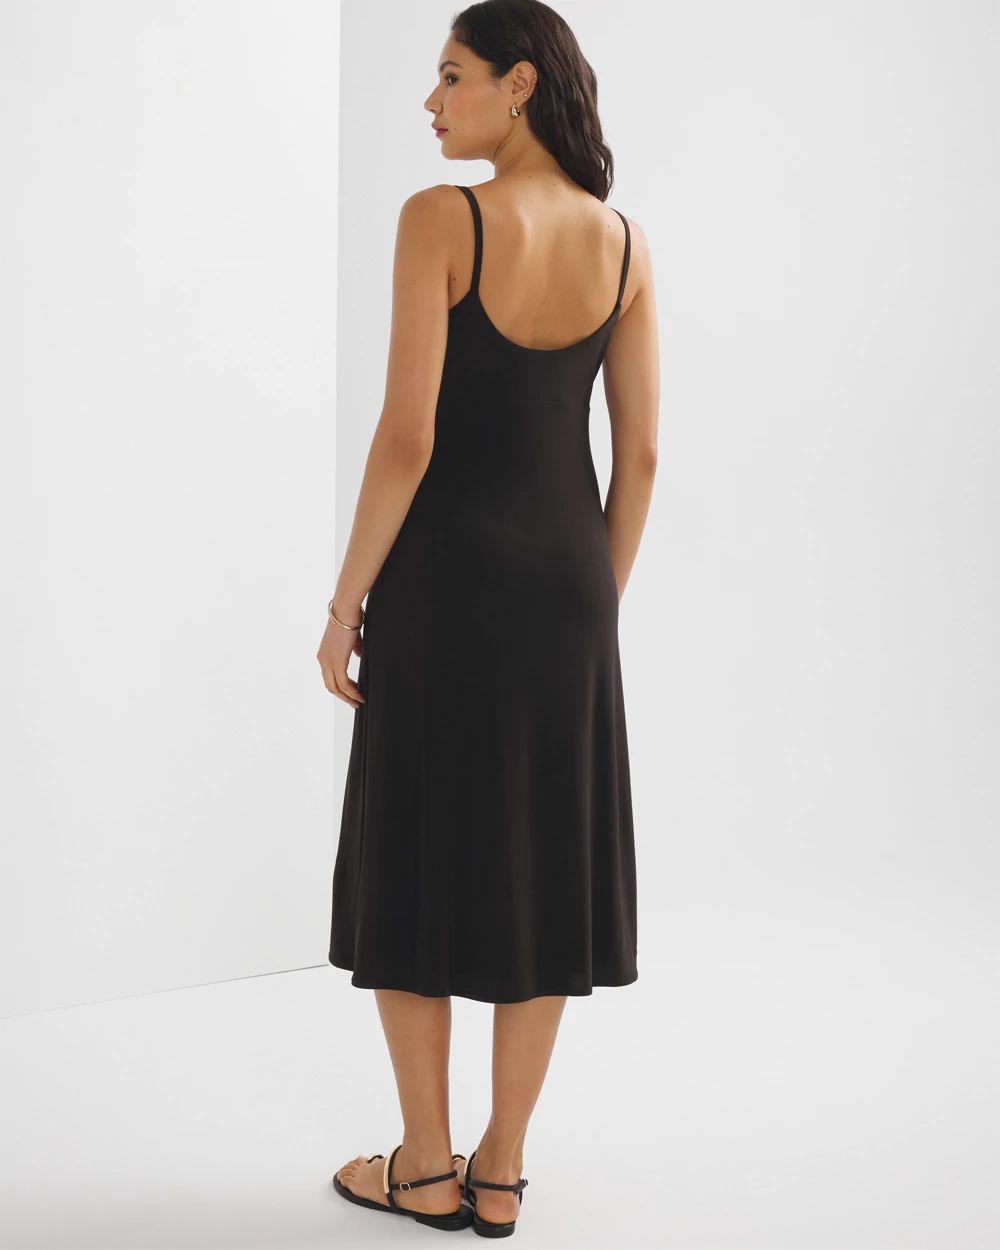 Cowl Neck Slip Dress click to view larger image.